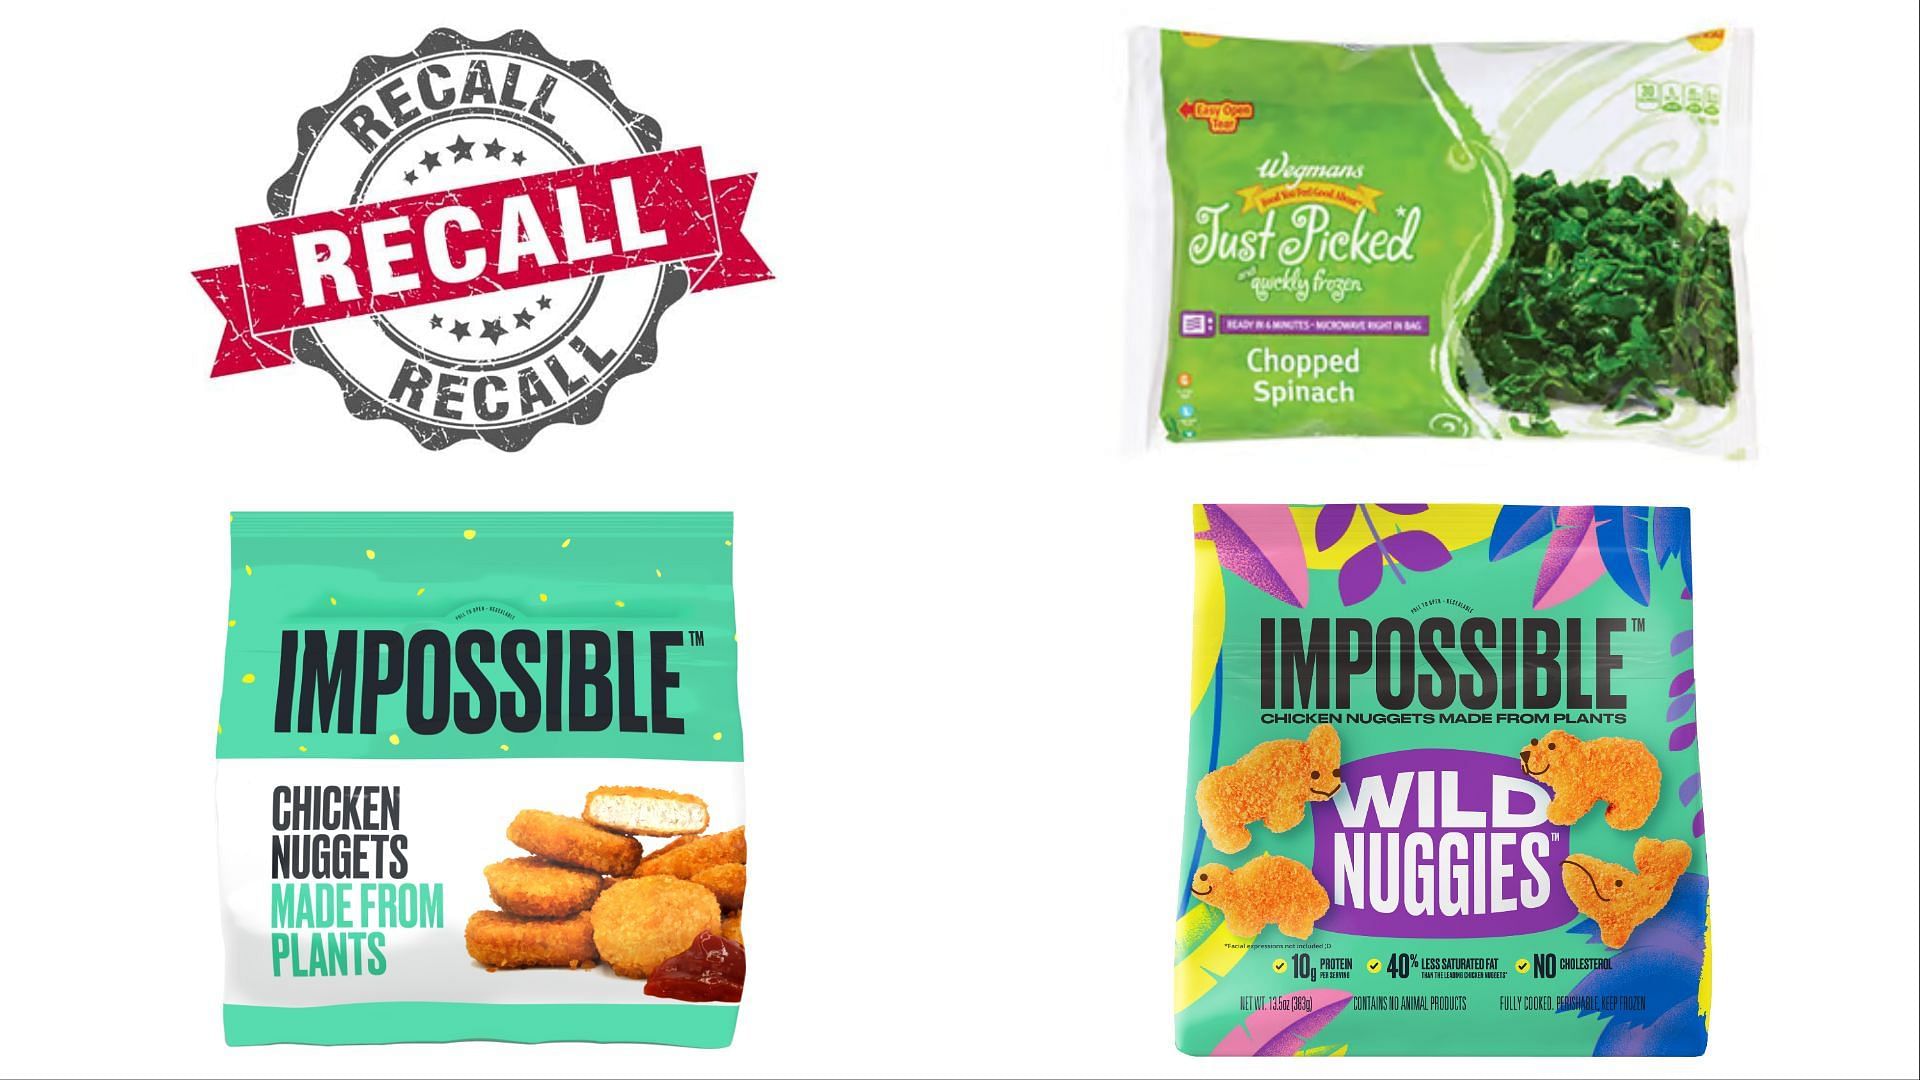 Wegmans frozen spinach and Impossible chicken nuggets recall reason